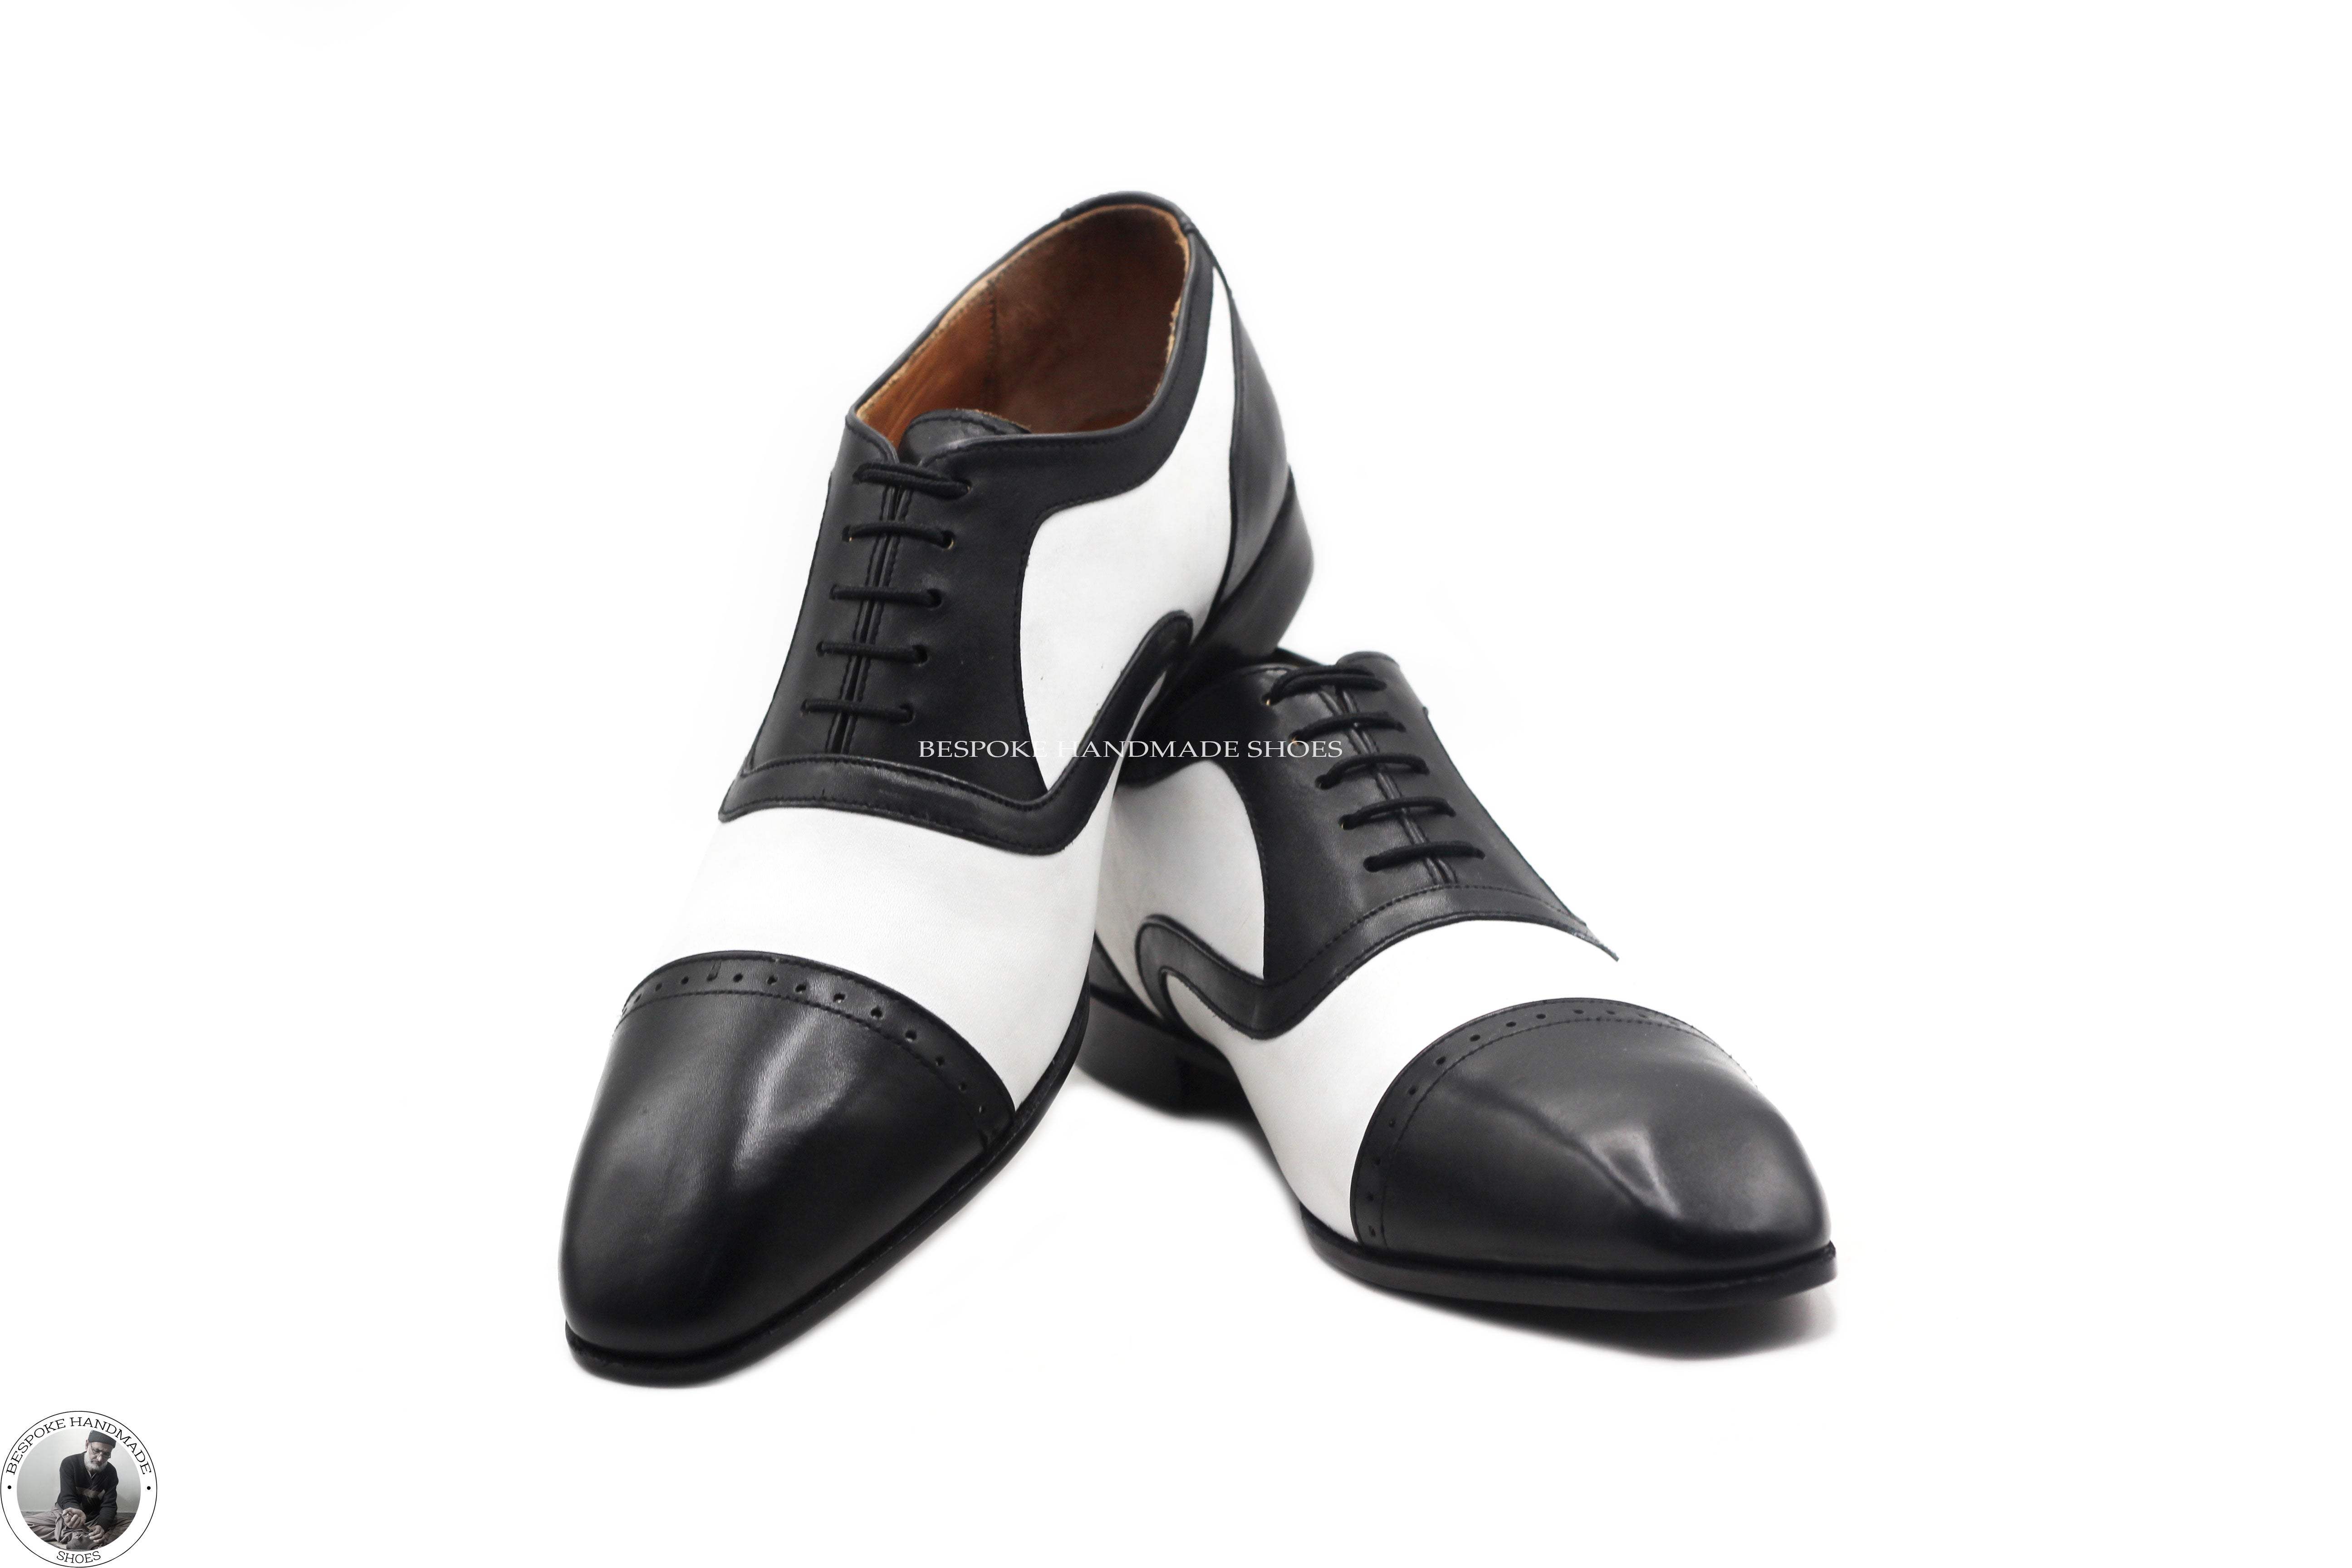 Handmade Men's Black And White Leather Wingtip Brogue Oxford Lace Up Formal Men's Shoes